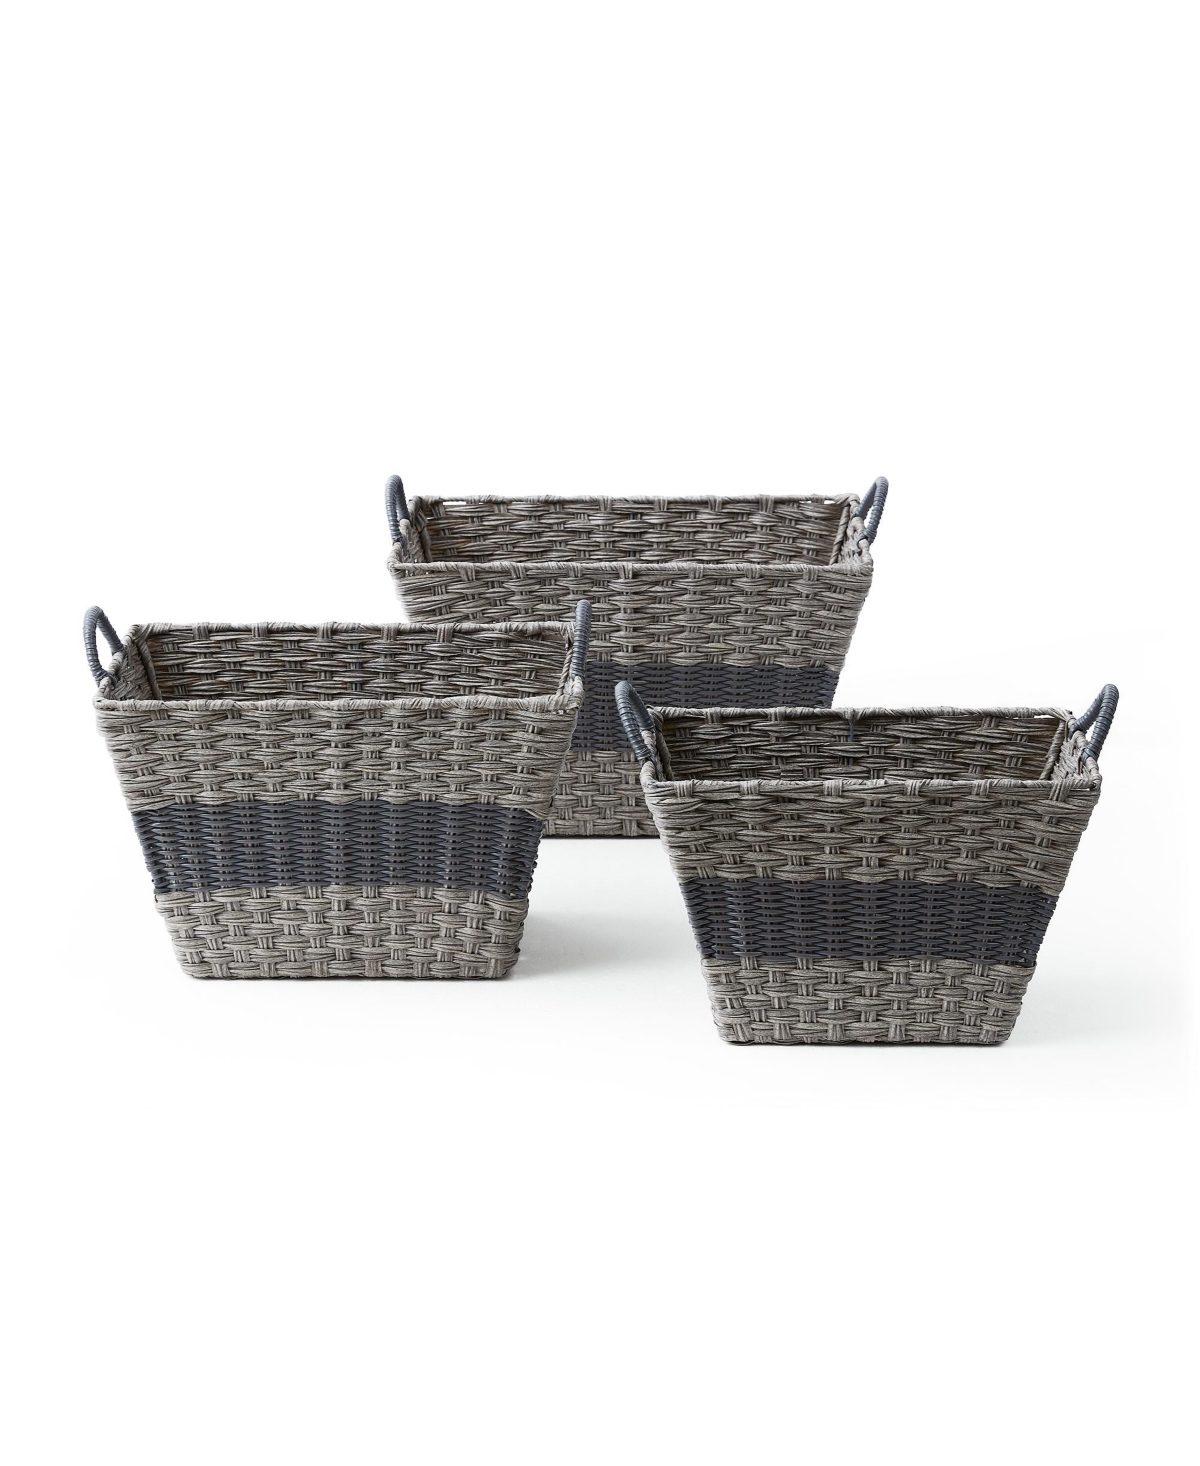 Baum 3 Piece Rectangular Faux Wicker Storage Bin Set In Combo Weave With Cut Out Handles In Natural